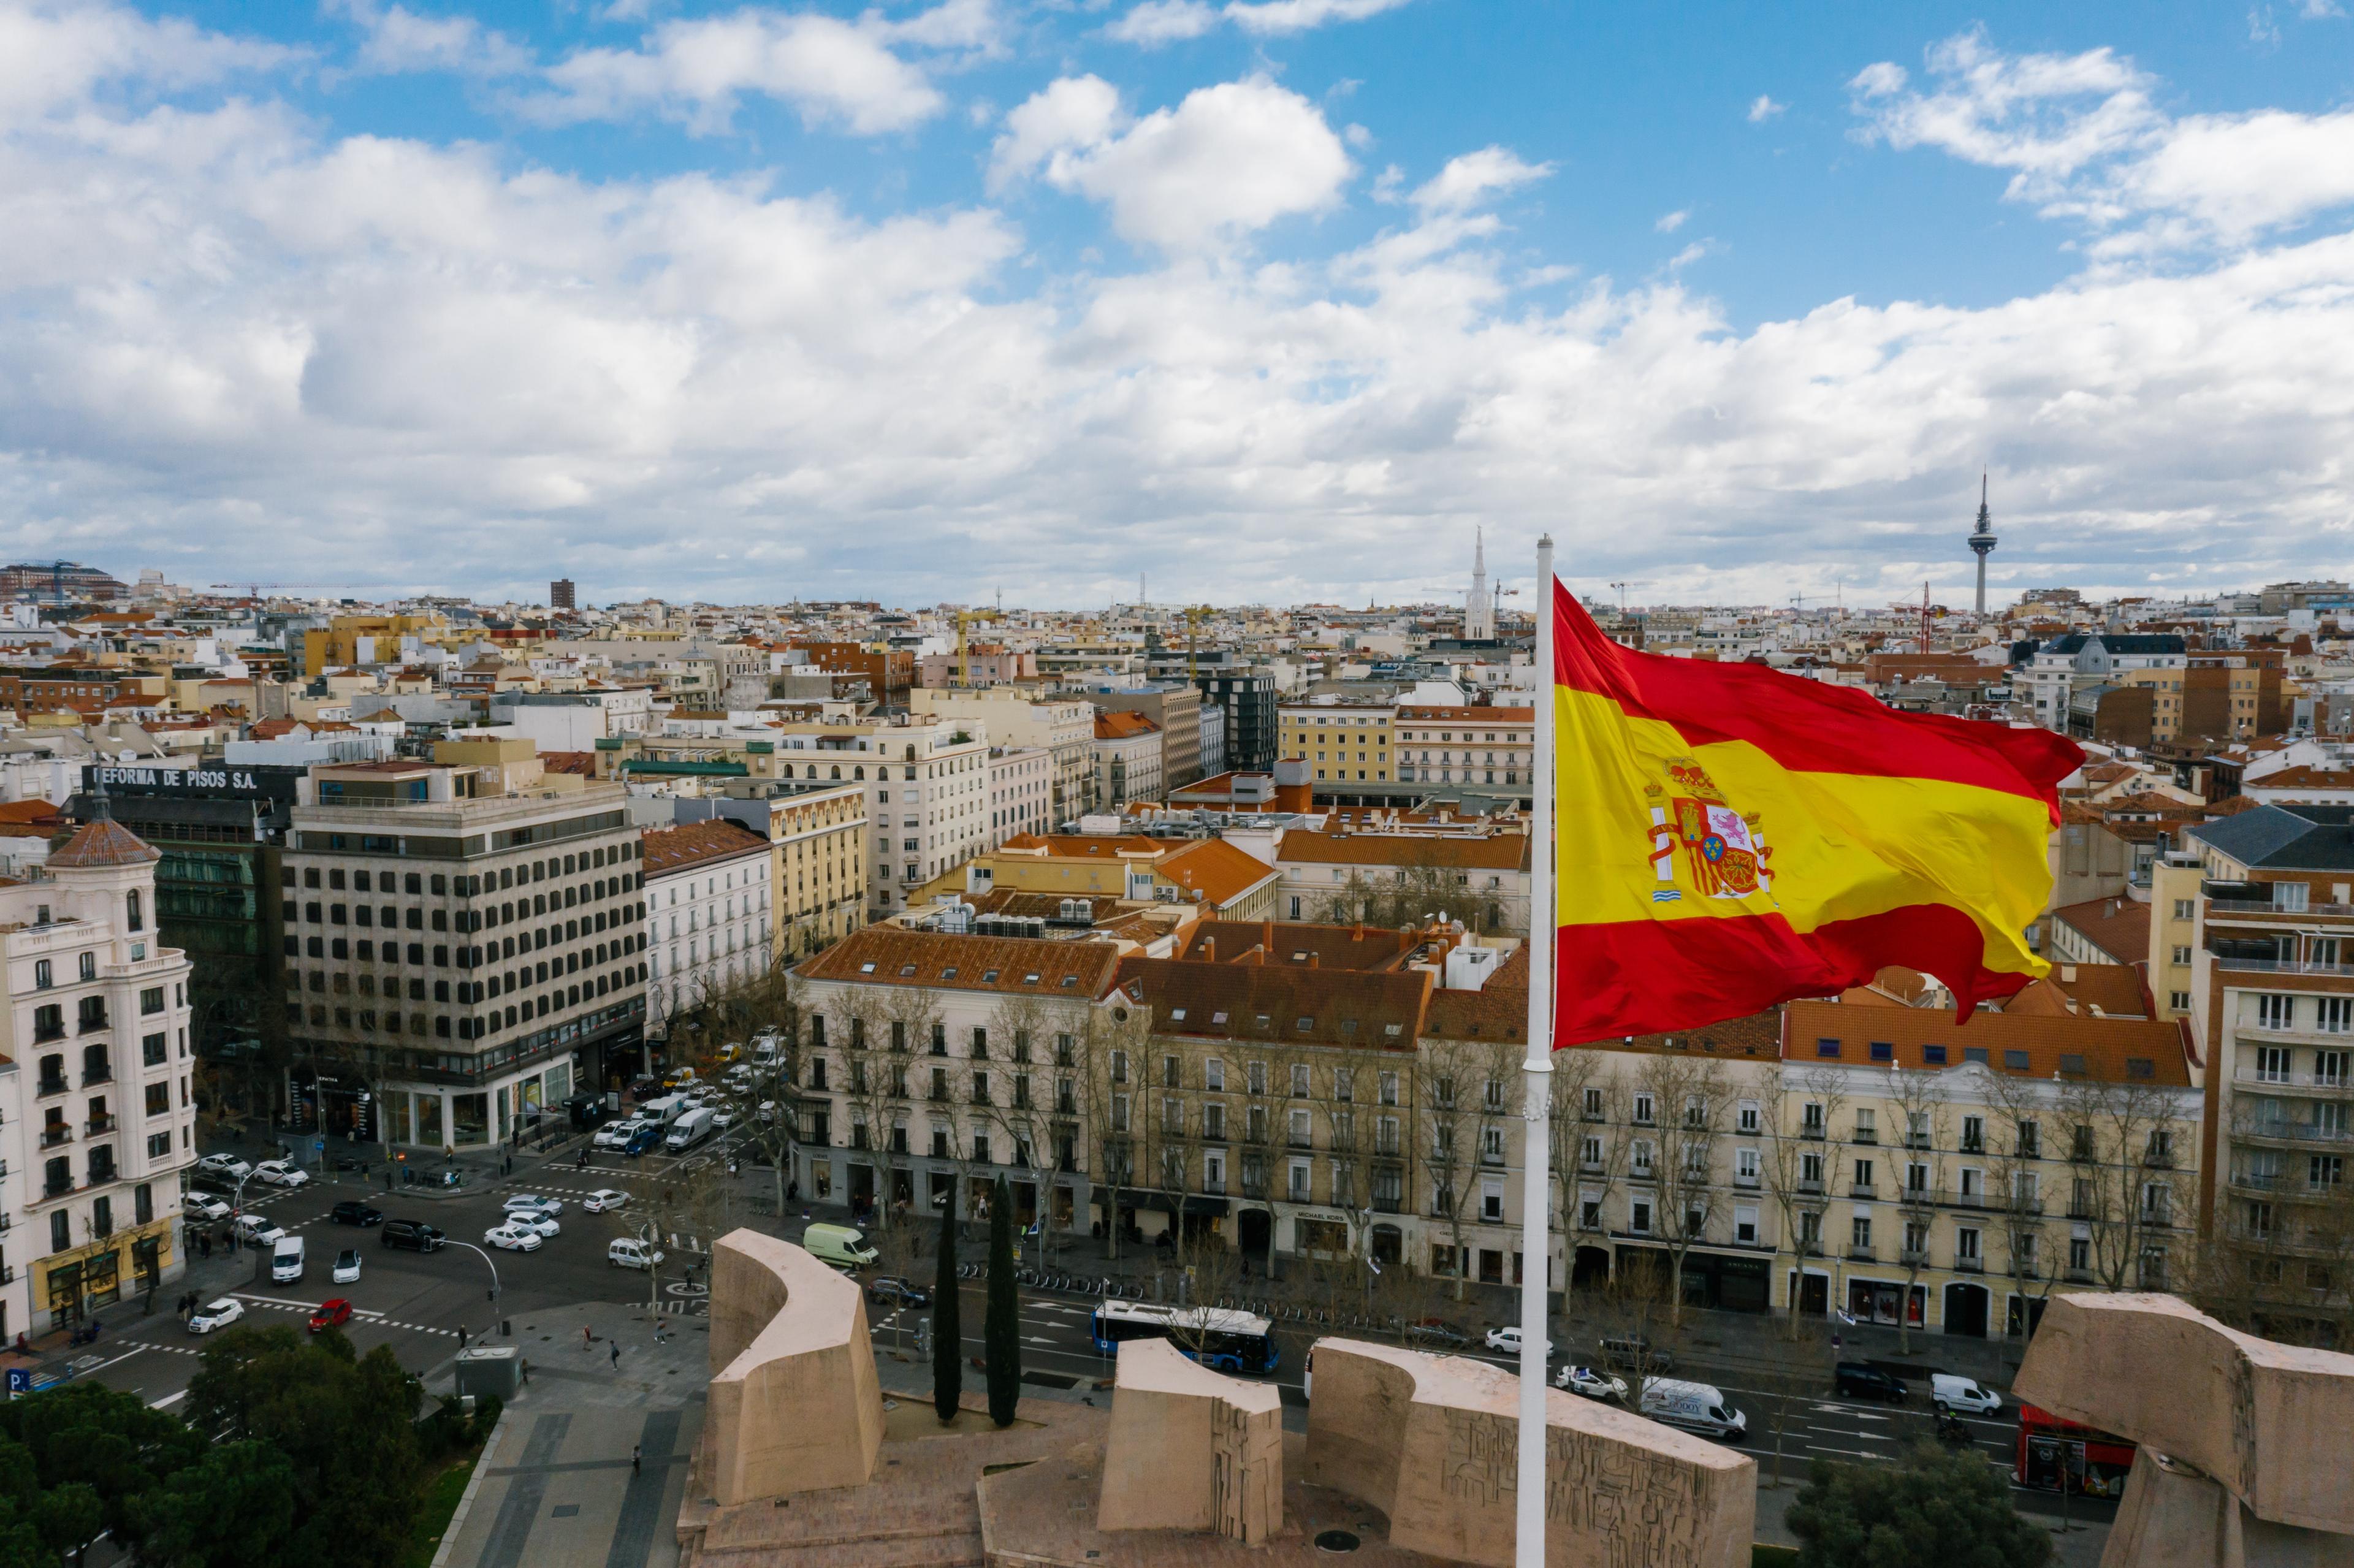 city scape of spain with a spanish flag in the foreground